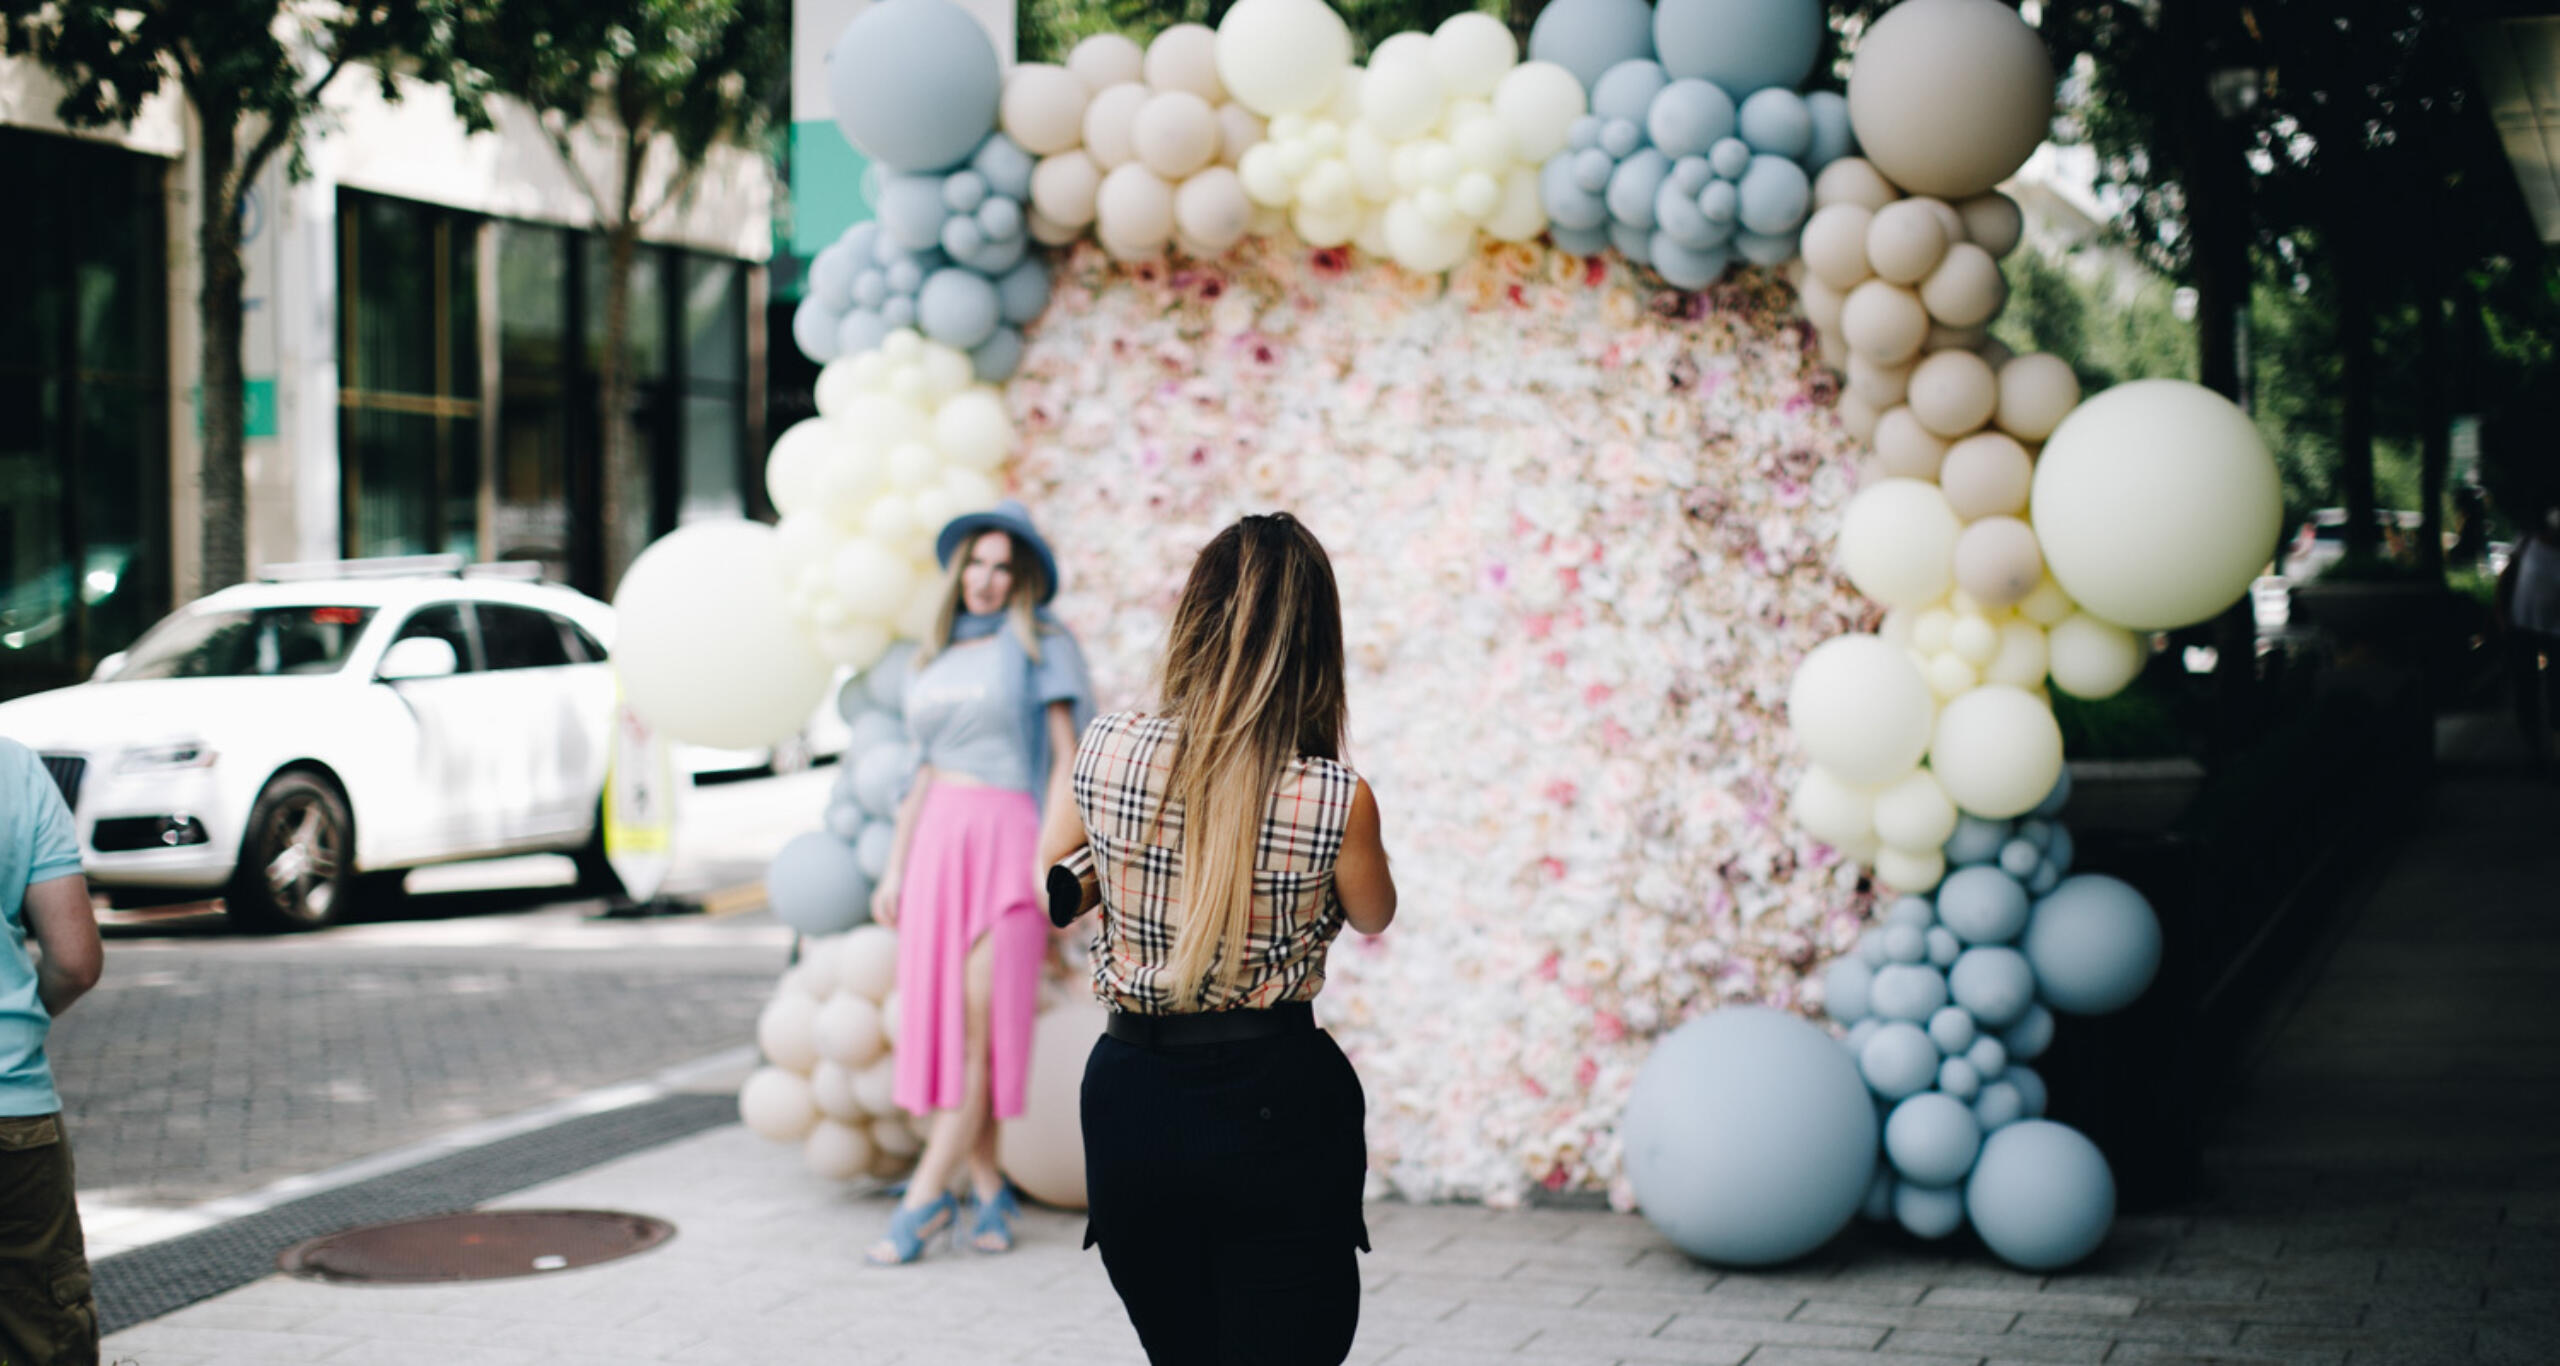 A woman posing for a photograph in front of a huge outdoor floral installation at Buckhead Village District